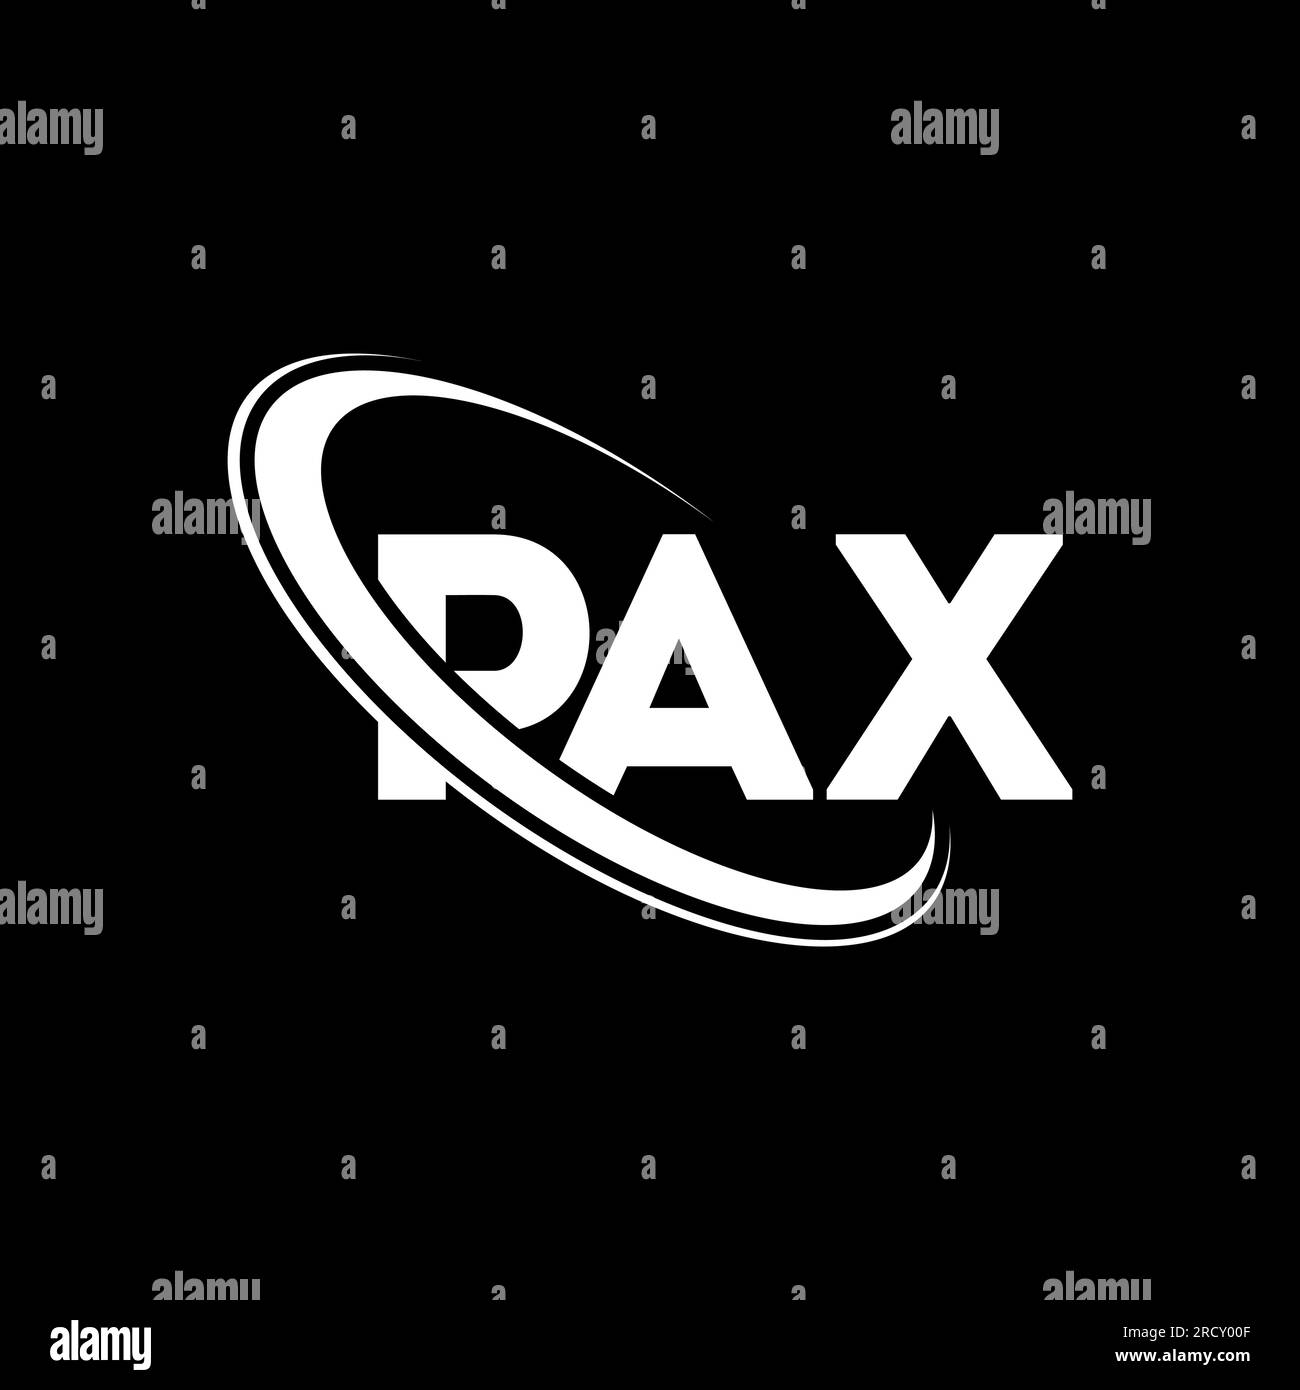 PAX logo. PAX letter. PAX letter logo design. Initials PAX logo linked with circle and uppercase monogram logo. PAX typography for technology, busines Stock Vector